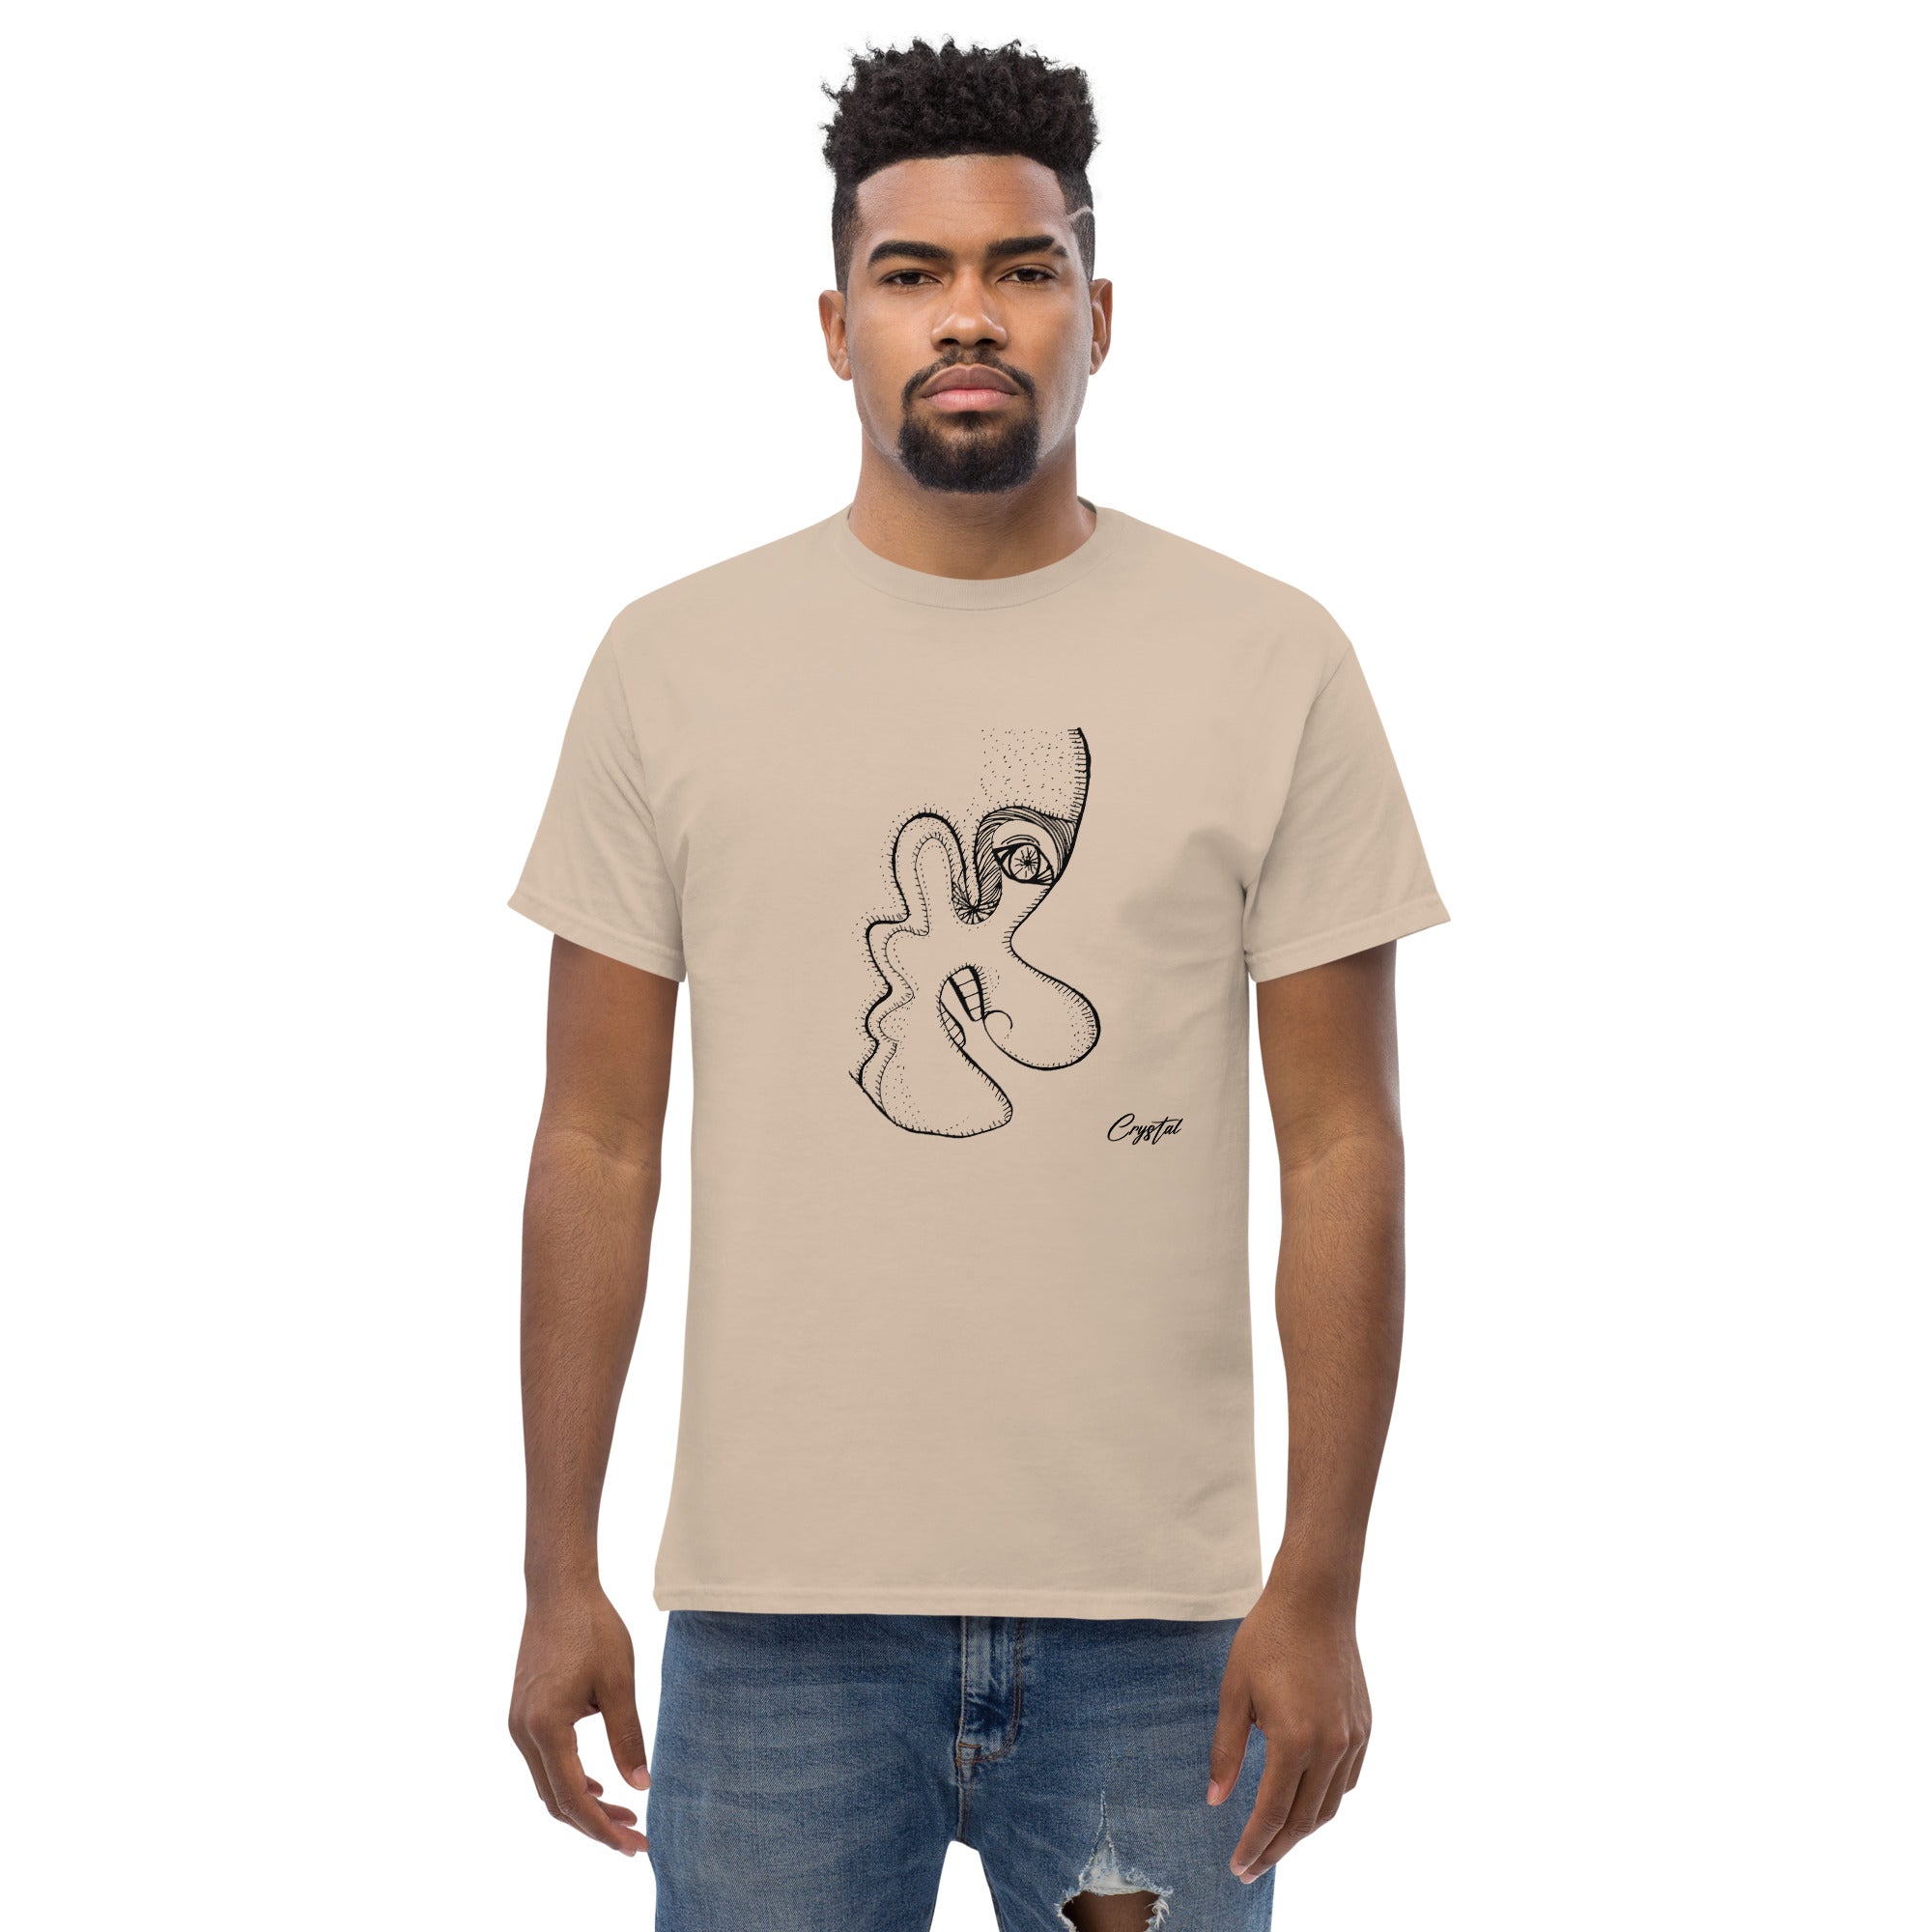 Older Man or Woman's Profile with Big Teeth and Big Nose - Cute & Creepy "Stay Weird" Cartoon Illustration Men's classic tee